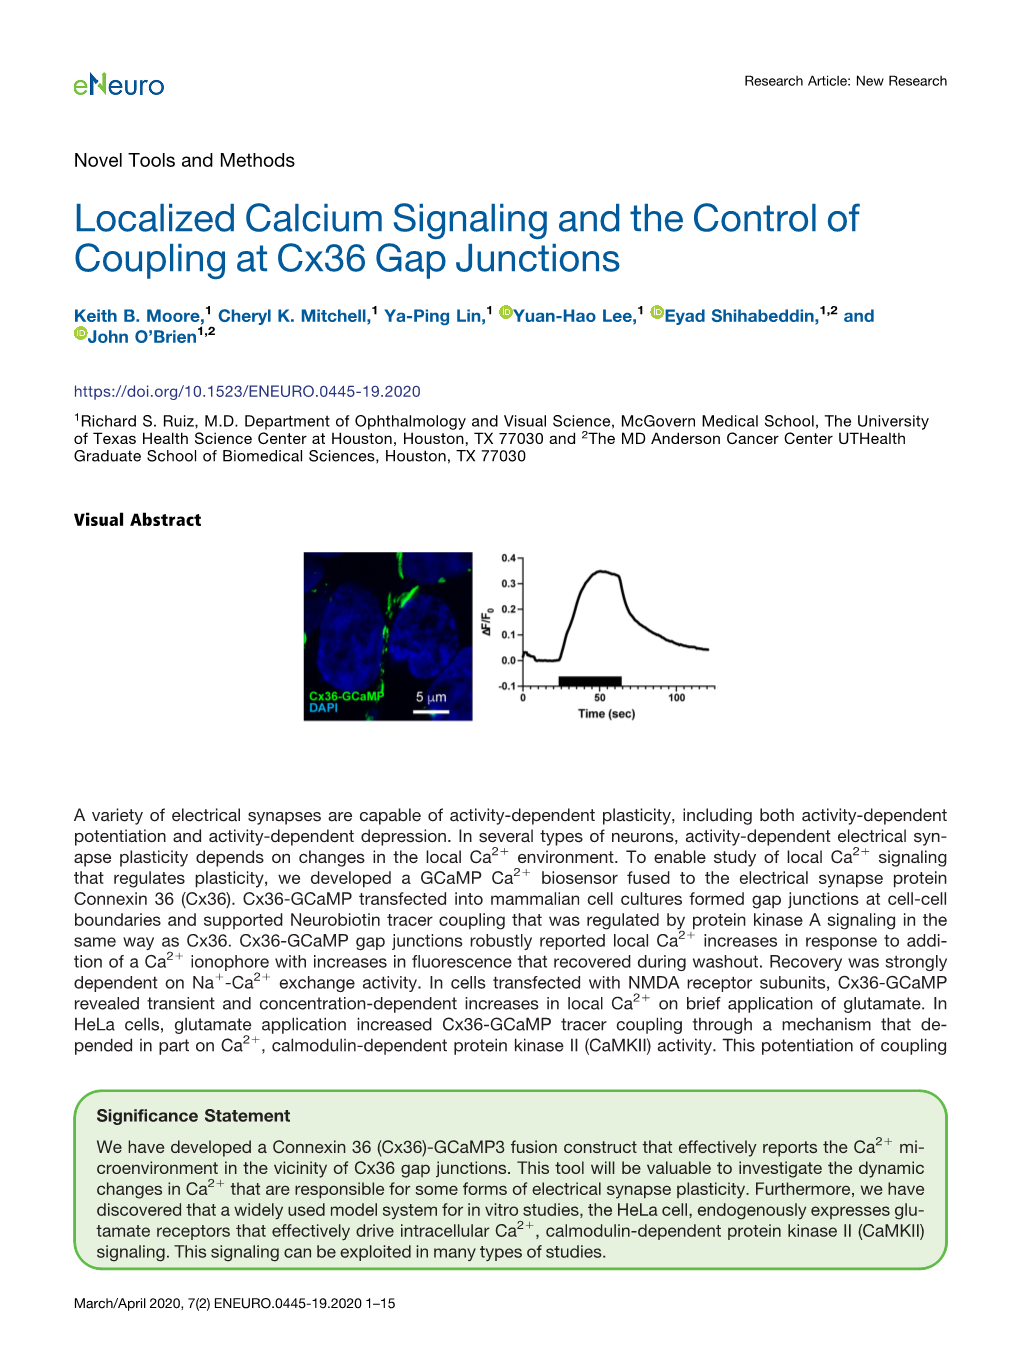 Localized Calcium Signaling and the Control of Coupling at Cx36 Gap Junctions